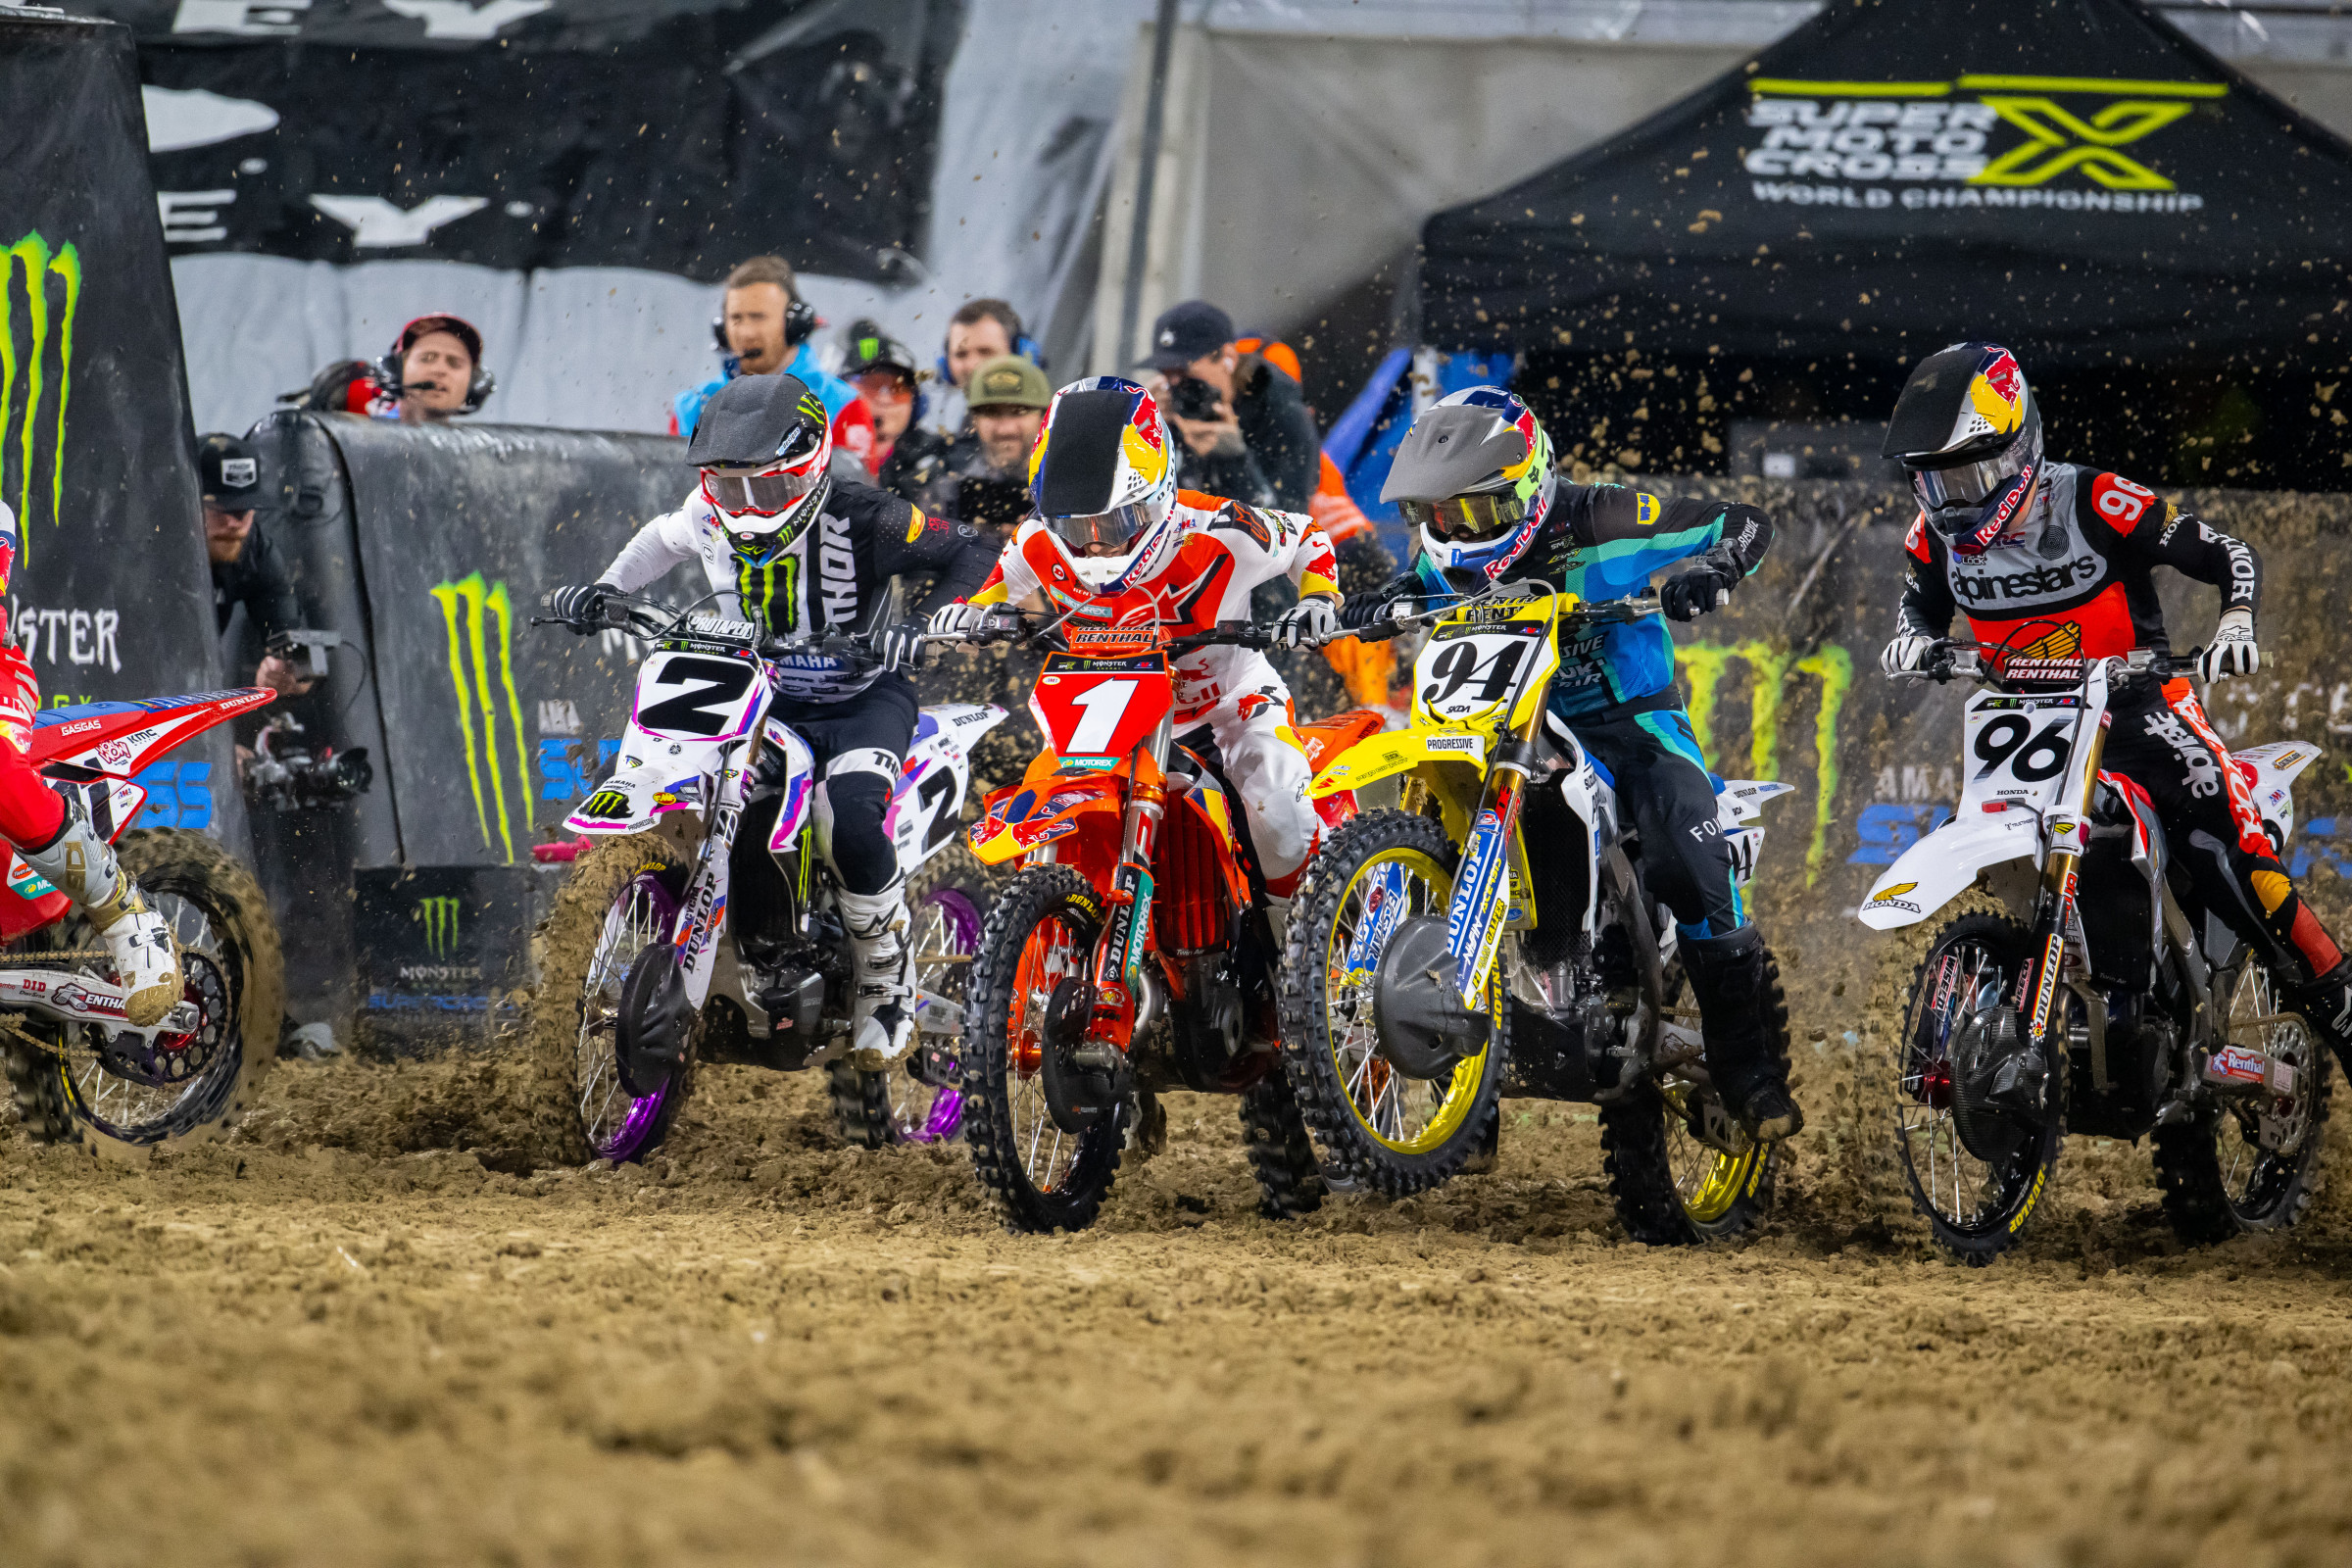 Results of the 250SX West Region at San Diego Supercross